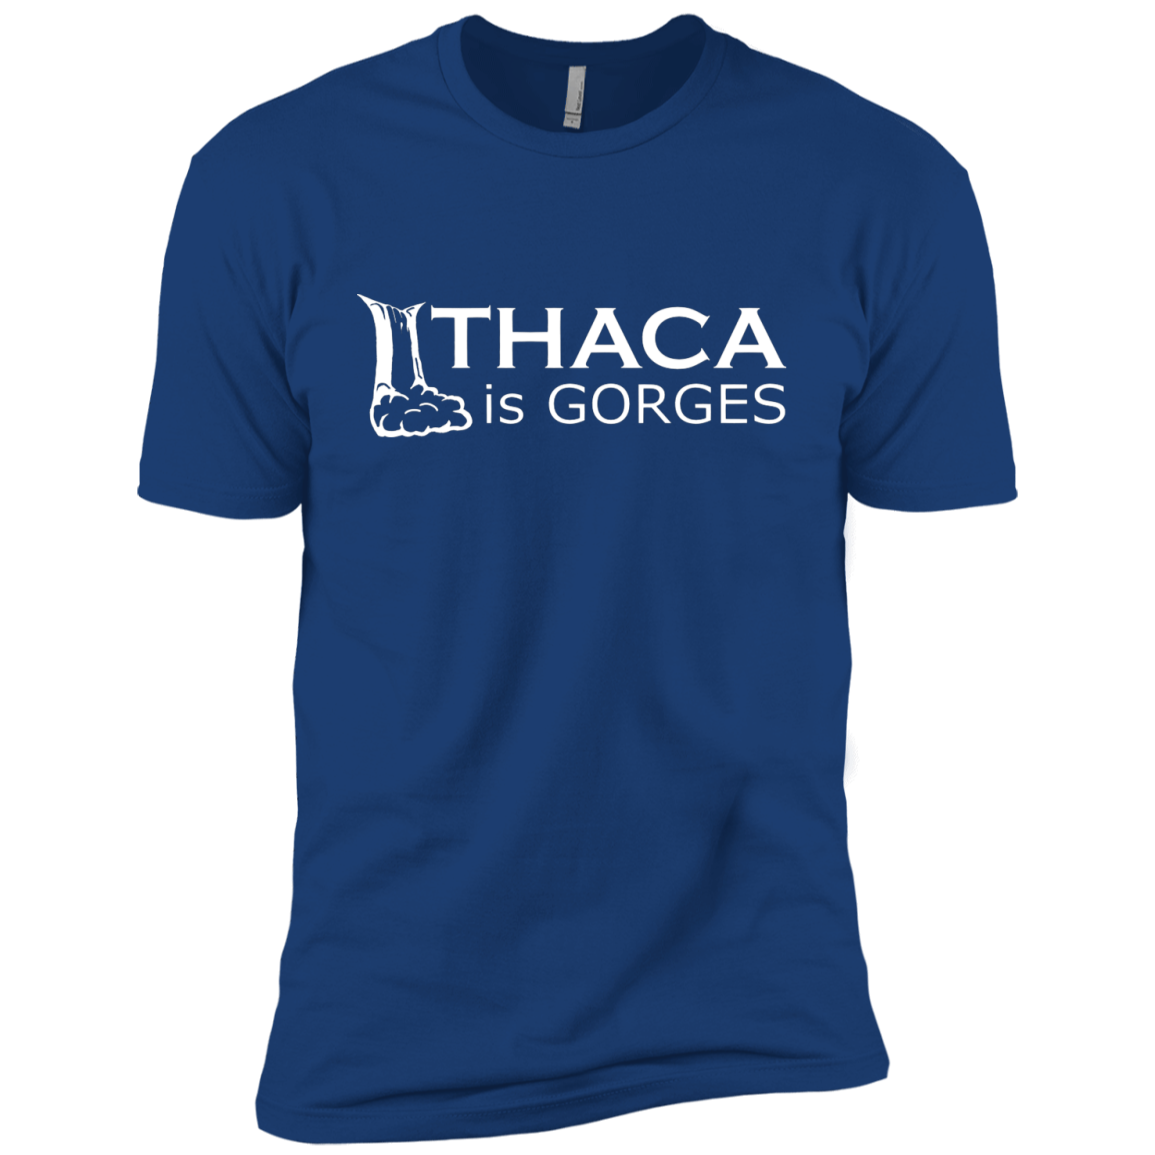 Ithaca is Gorges Youth Cotton T-Shirt (White Graphic)